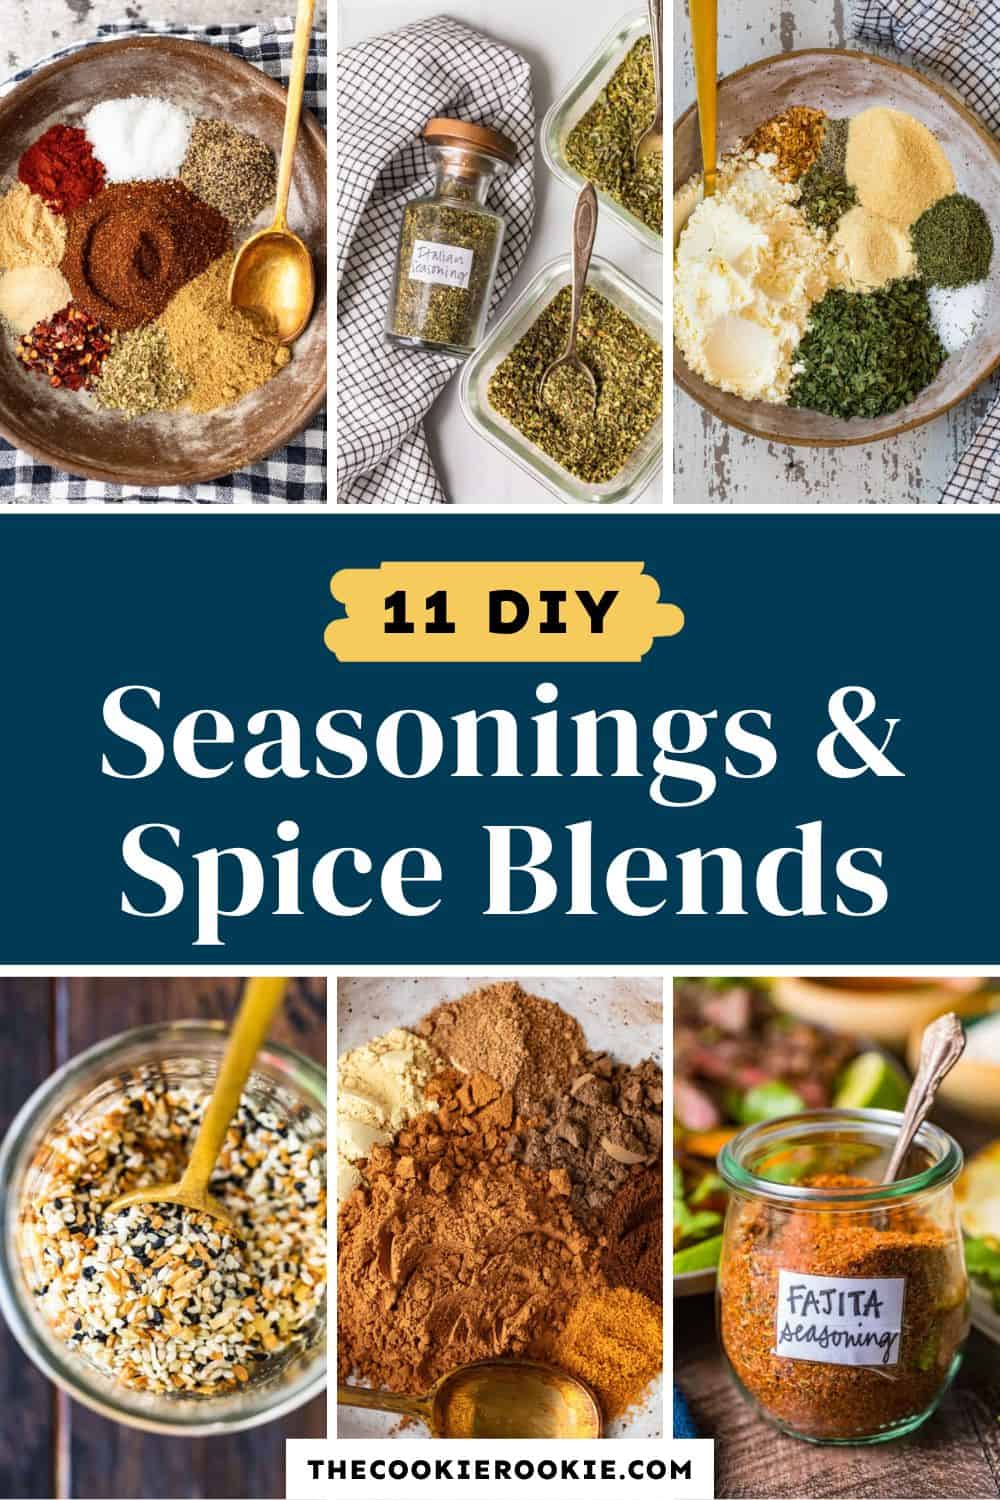 12 Spice Mixes to Make for Home or to Give as Gifts - Good Cheap Eats